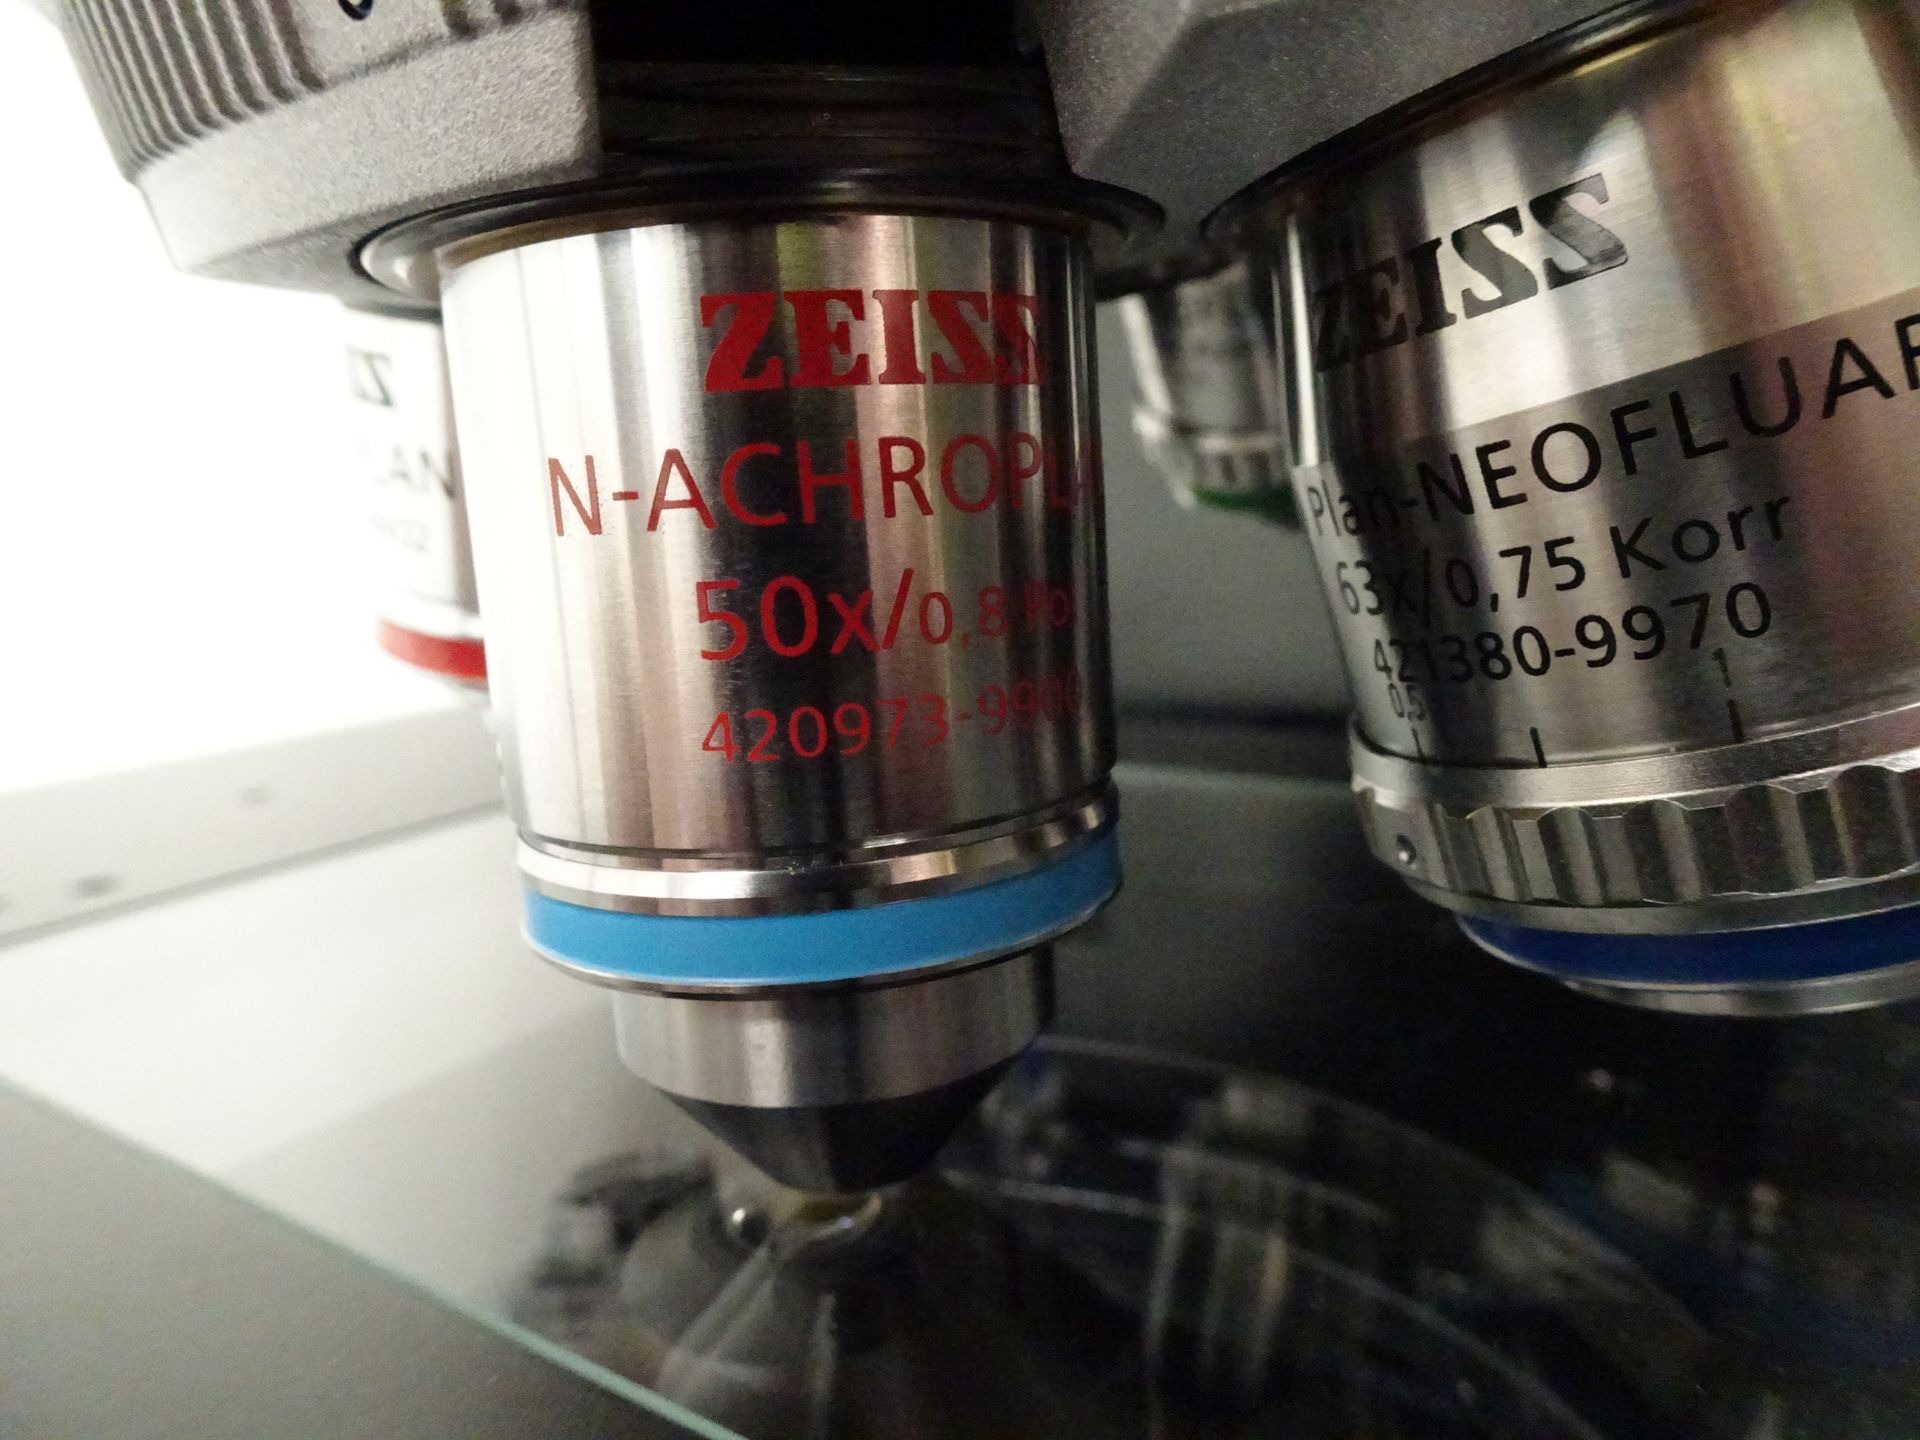 Zeiss Axio Imager.M2 Microscope With AxioCam MRM Camers With 60N-C 1" Camera Adapter, (2) 1PL 10x/23 - Image 19 of 22